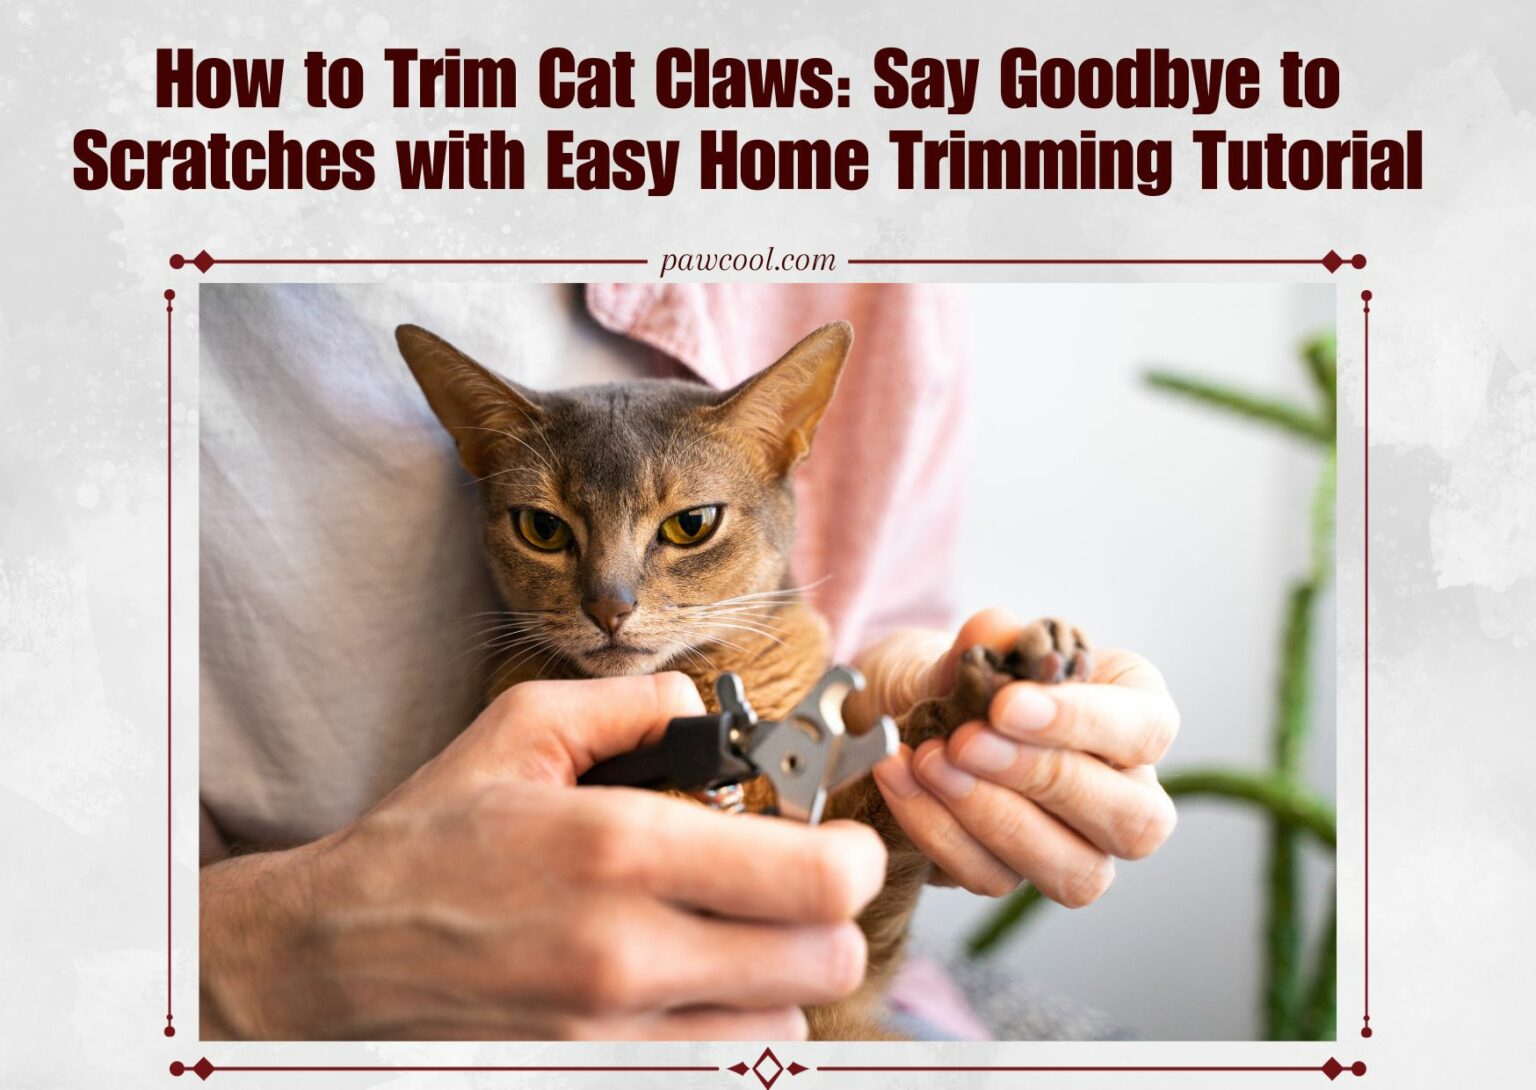 How to Trim Cat Claws: Say Goodbye to Scratches with Our Easy Home Trimming Tutorial